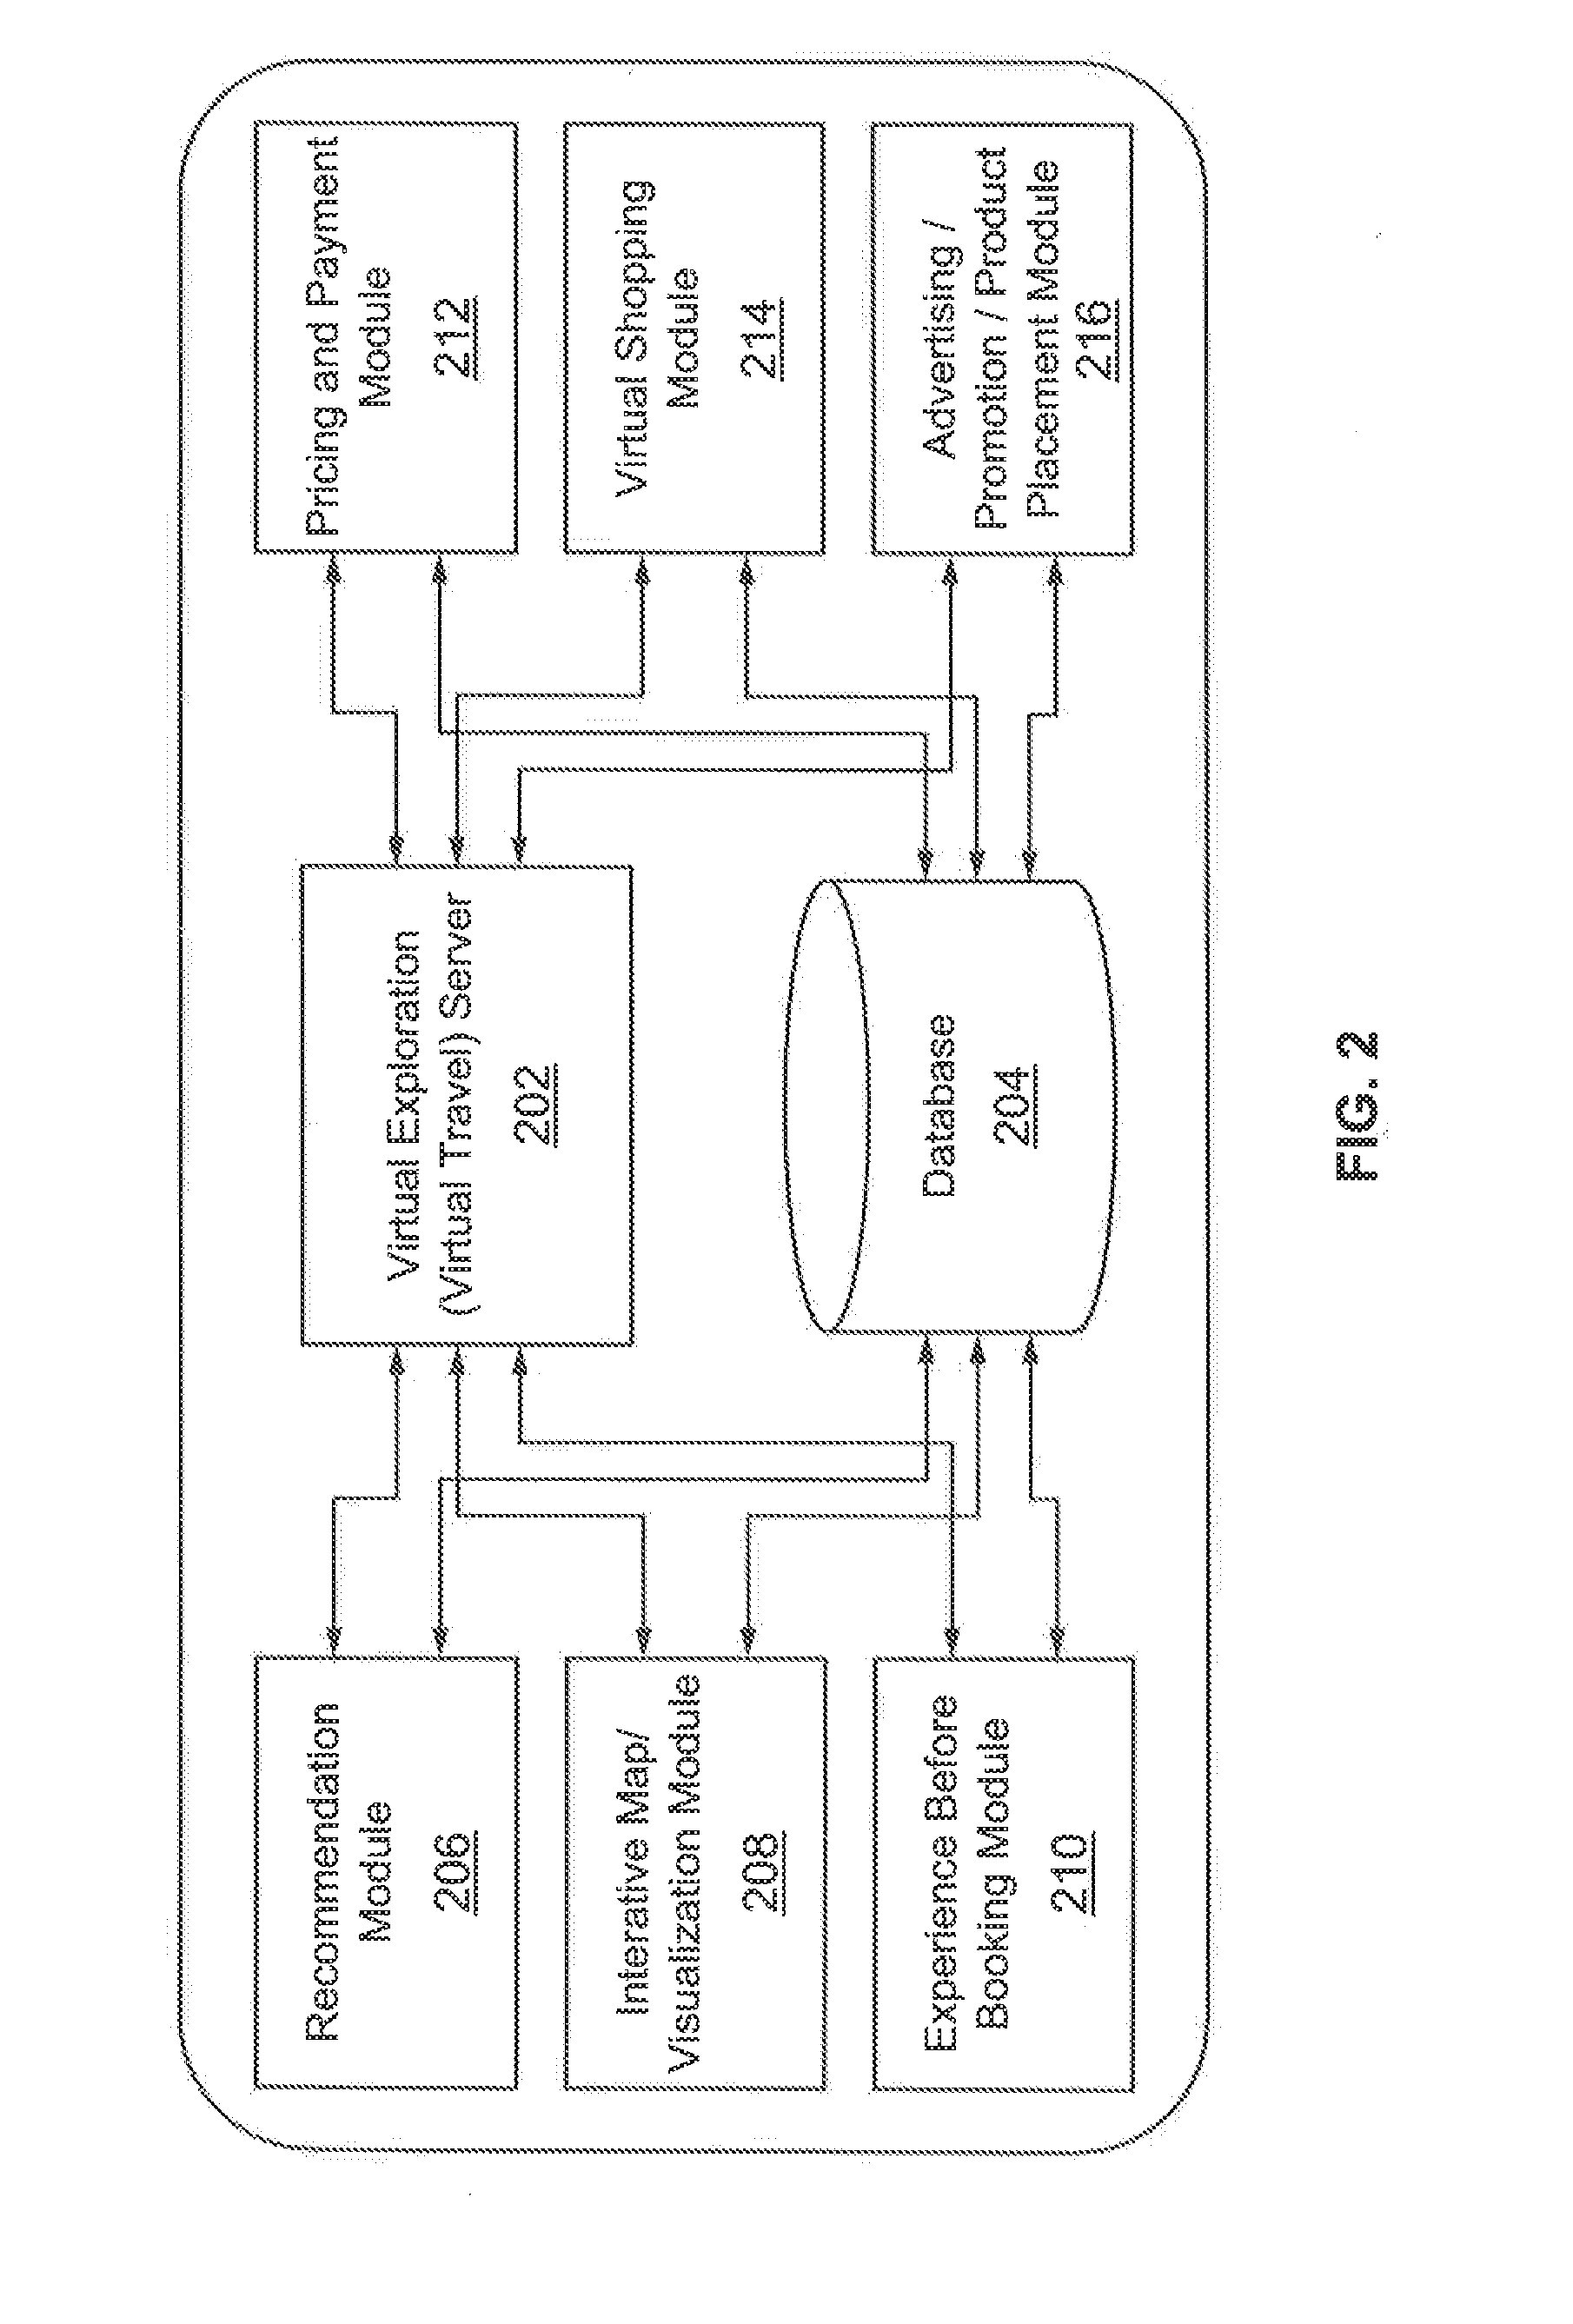 Internet-based real-time virtual travel system and method